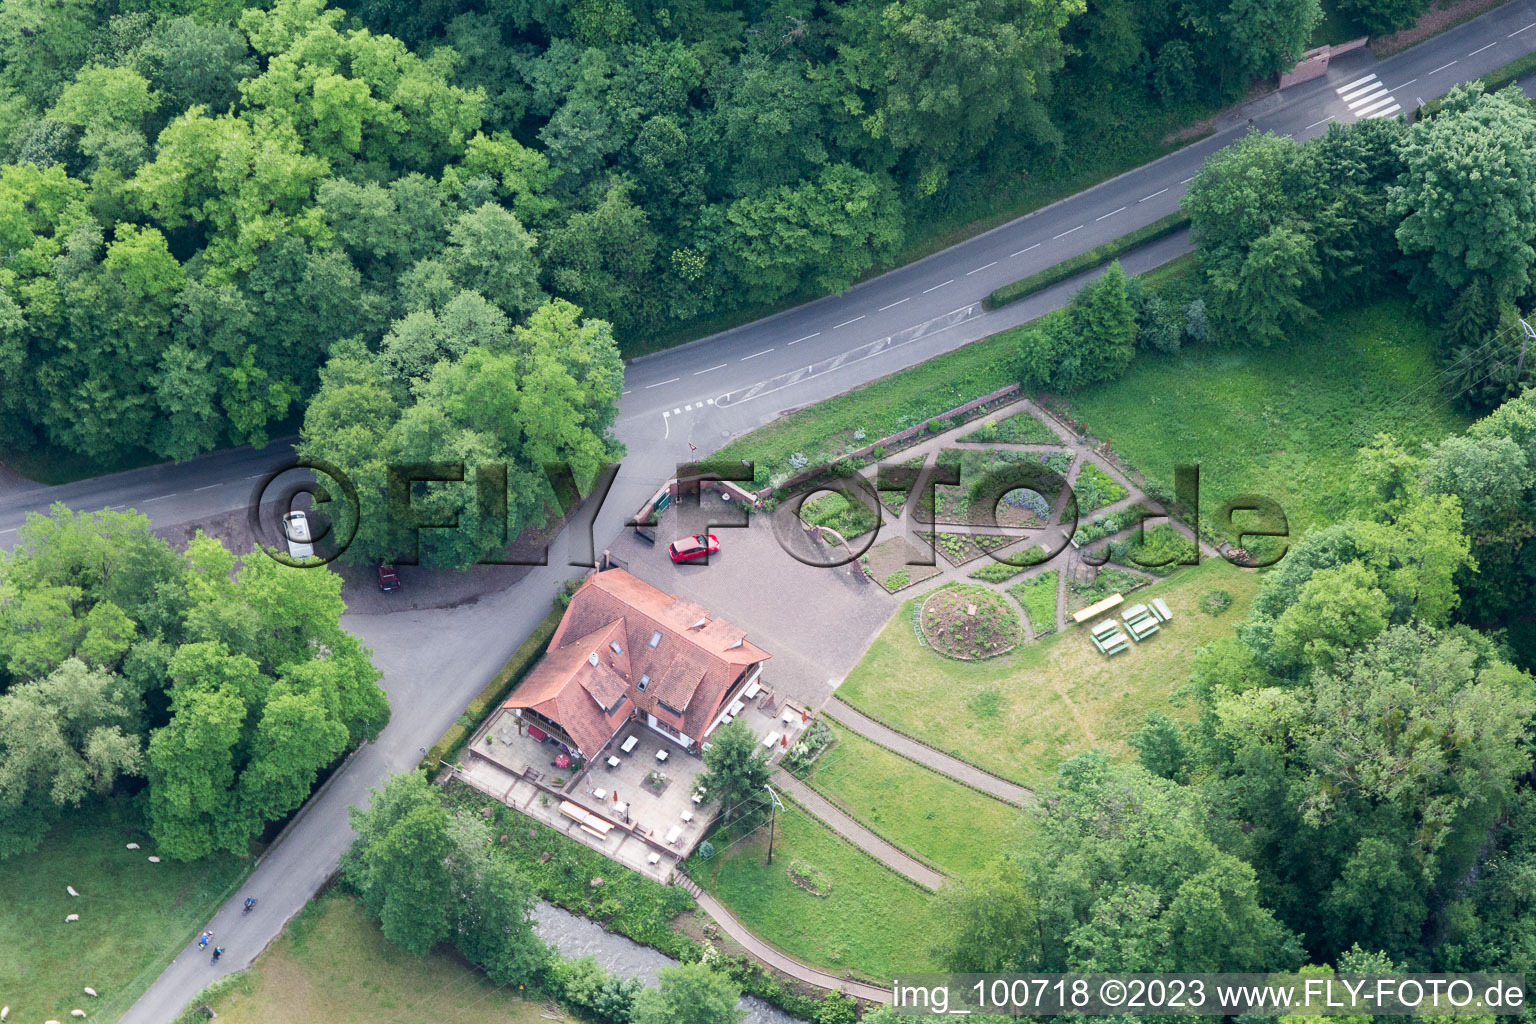 Oblique view of Sankt Germannshof in the state Rhineland-Palatinate, Germany